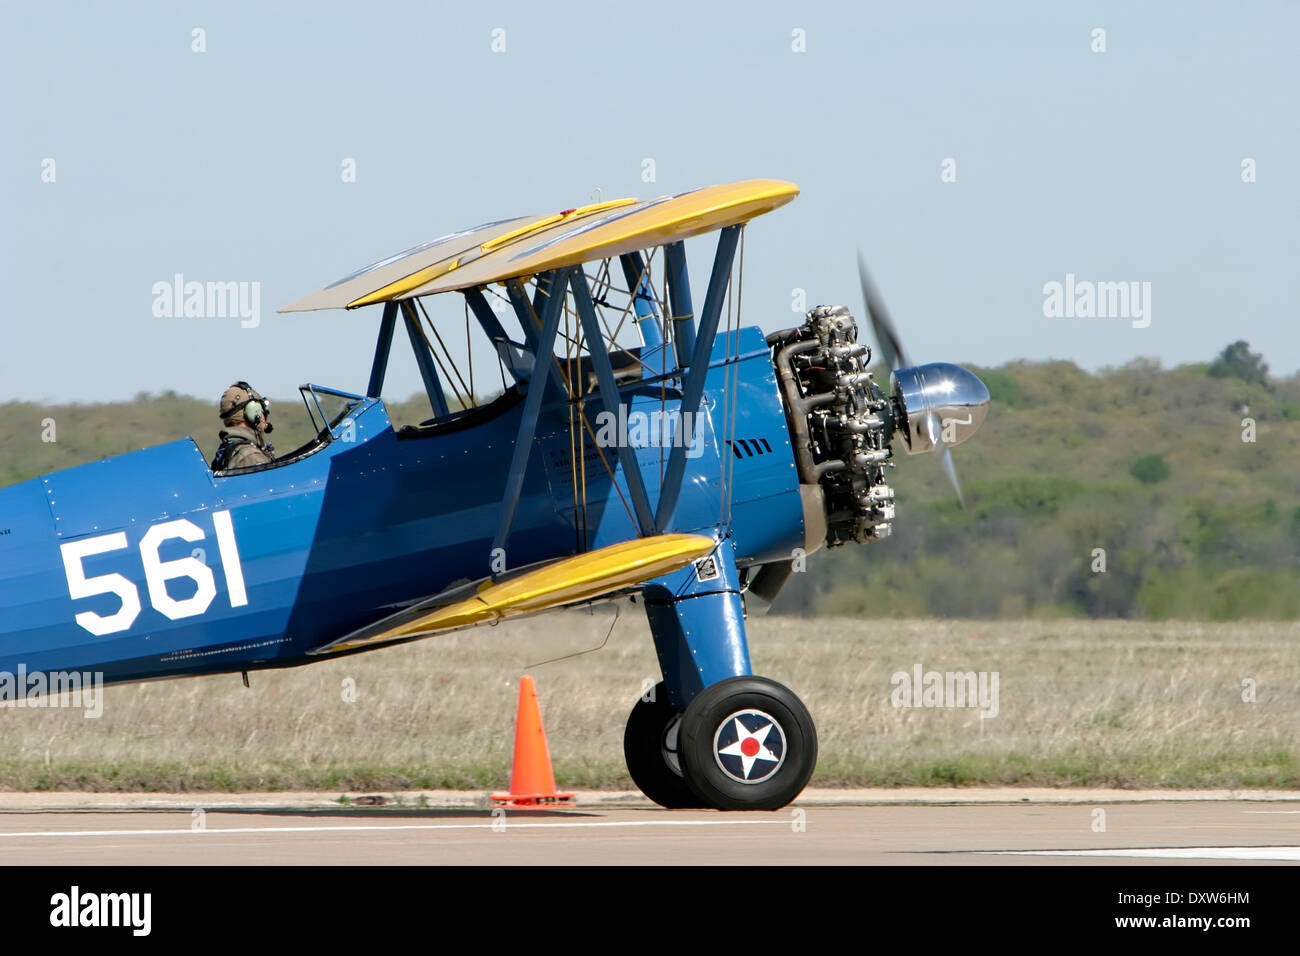 Airshow Featuring the 1943 Boeing A75N1 PT17 Biplane Stock Photo